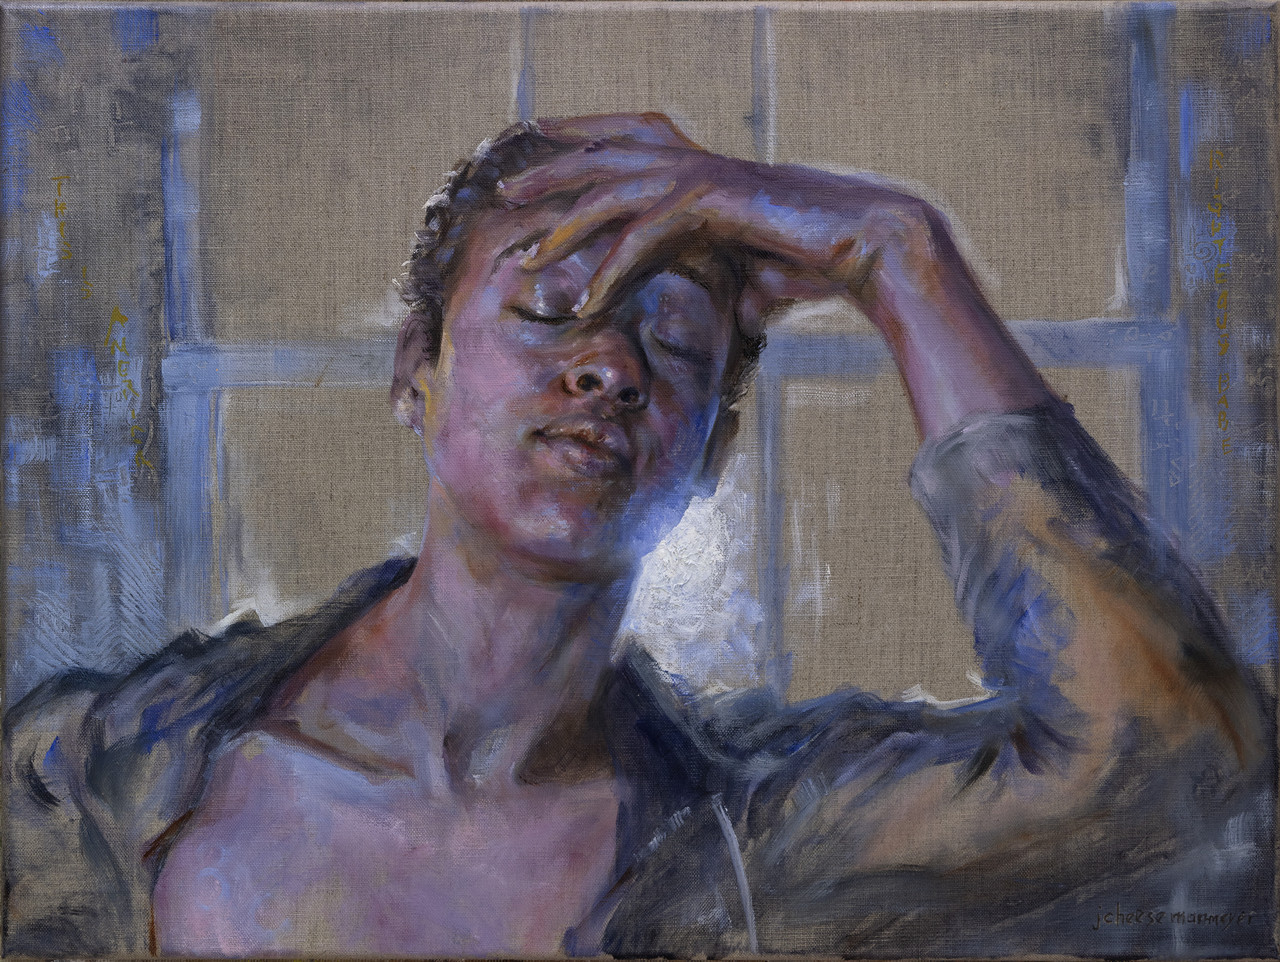 Painting on tan linen of a window with glare. In front of the window is a woman with dark skin in a dark opened shirt, leaning with one arm up and bent so her hand reaches her forehead. Her face is tilted slightly upwards and her eyes are closed.